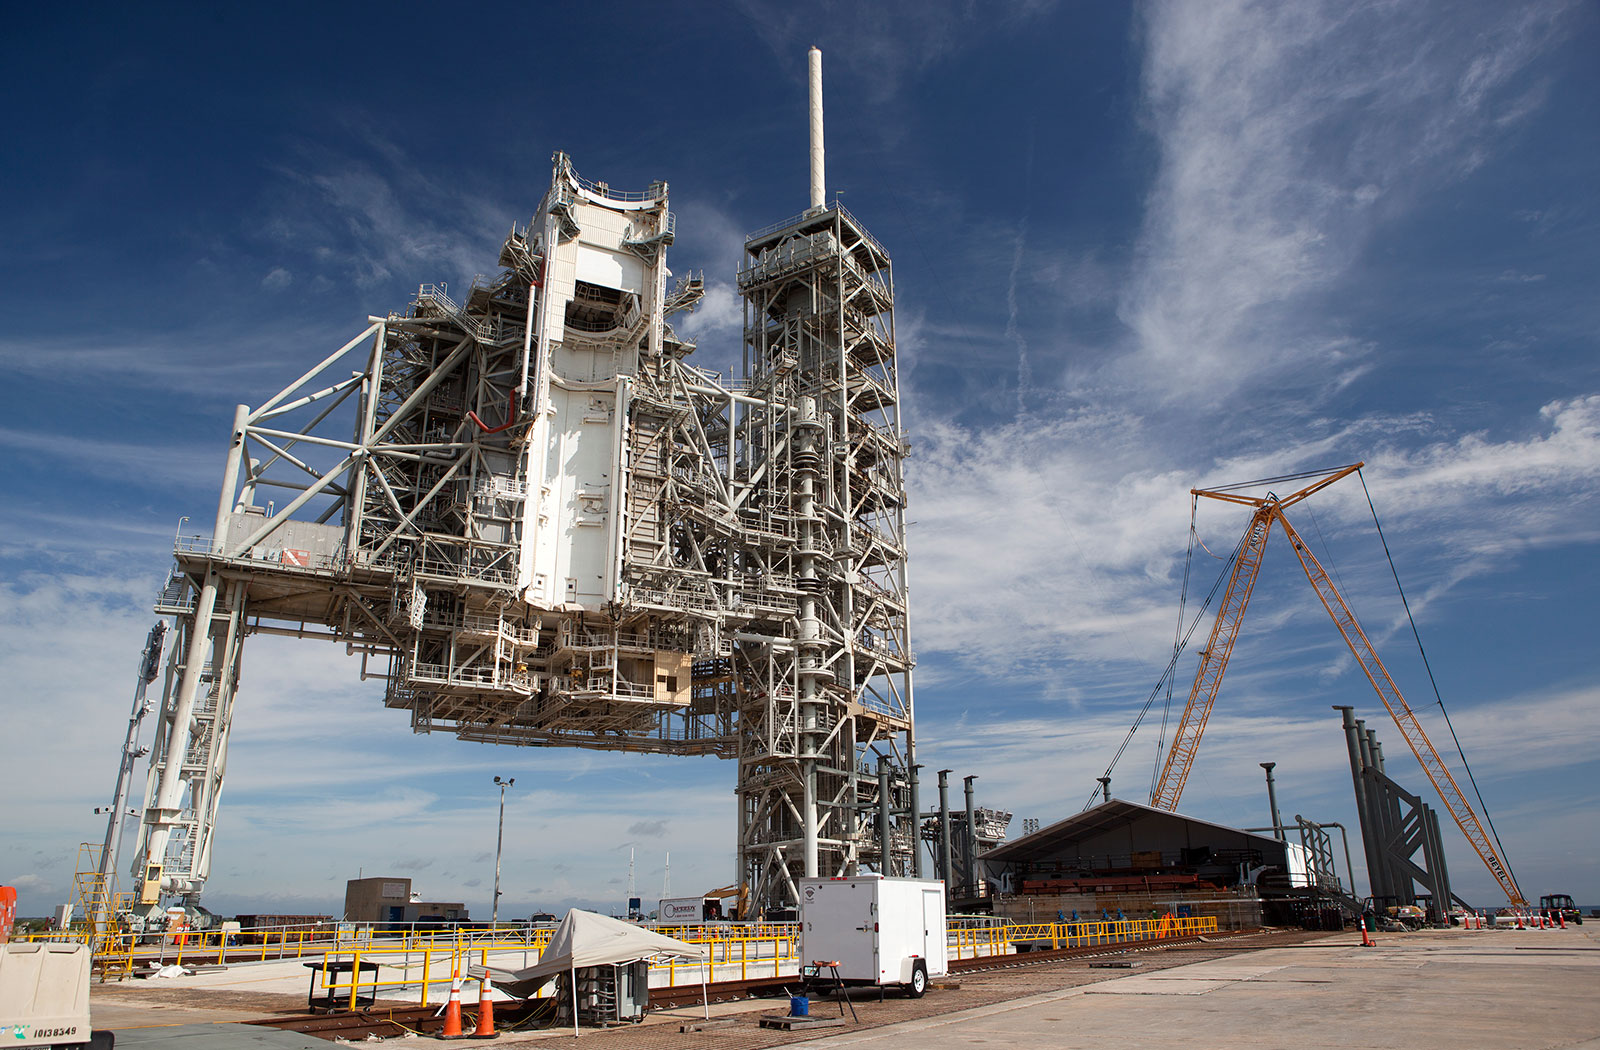 Launch Pad 39A at NASA's Kennedy Space Center